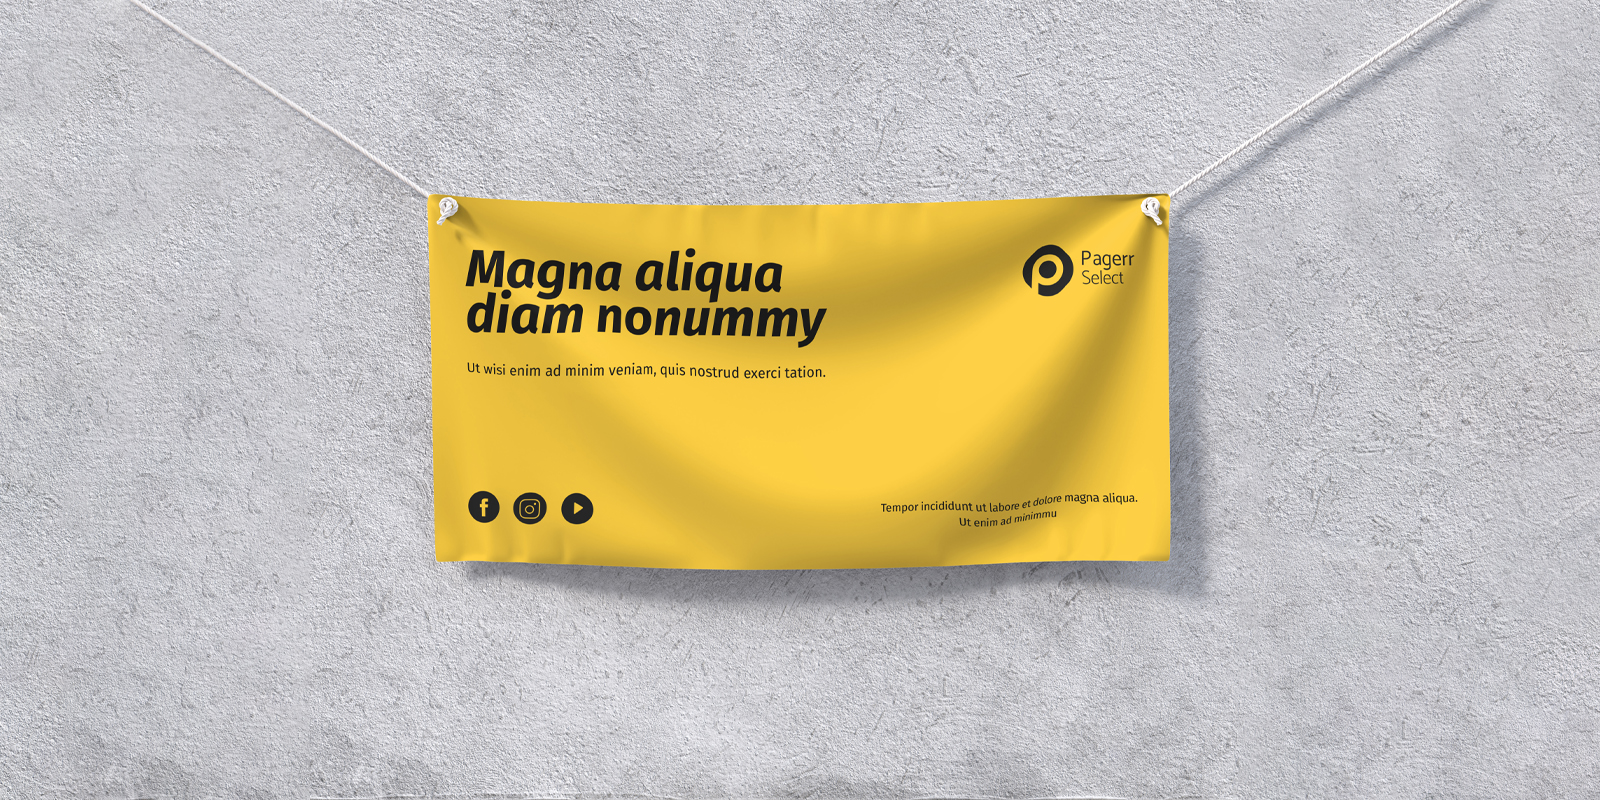 Fabric banners in Vilnius - Print with Pagerr